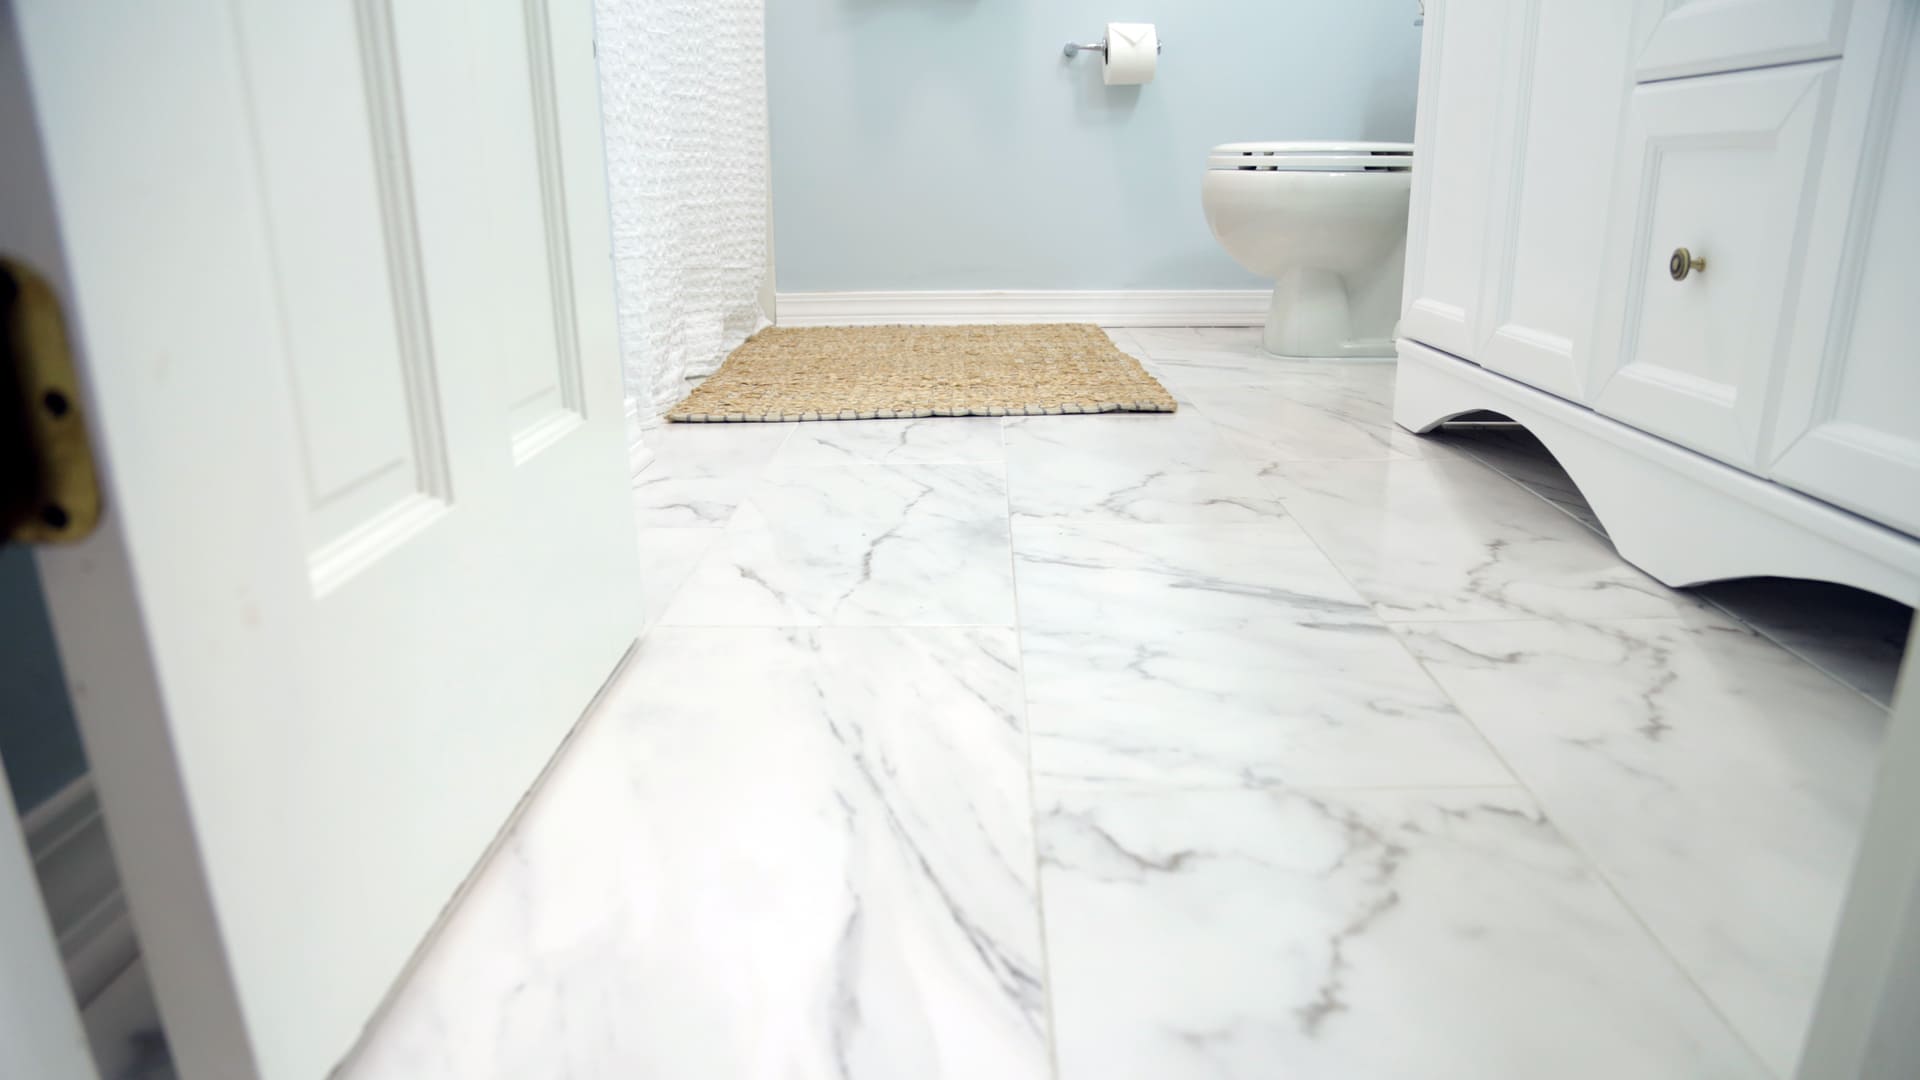 How to Lay Ceramic Tile on a Tile Floor